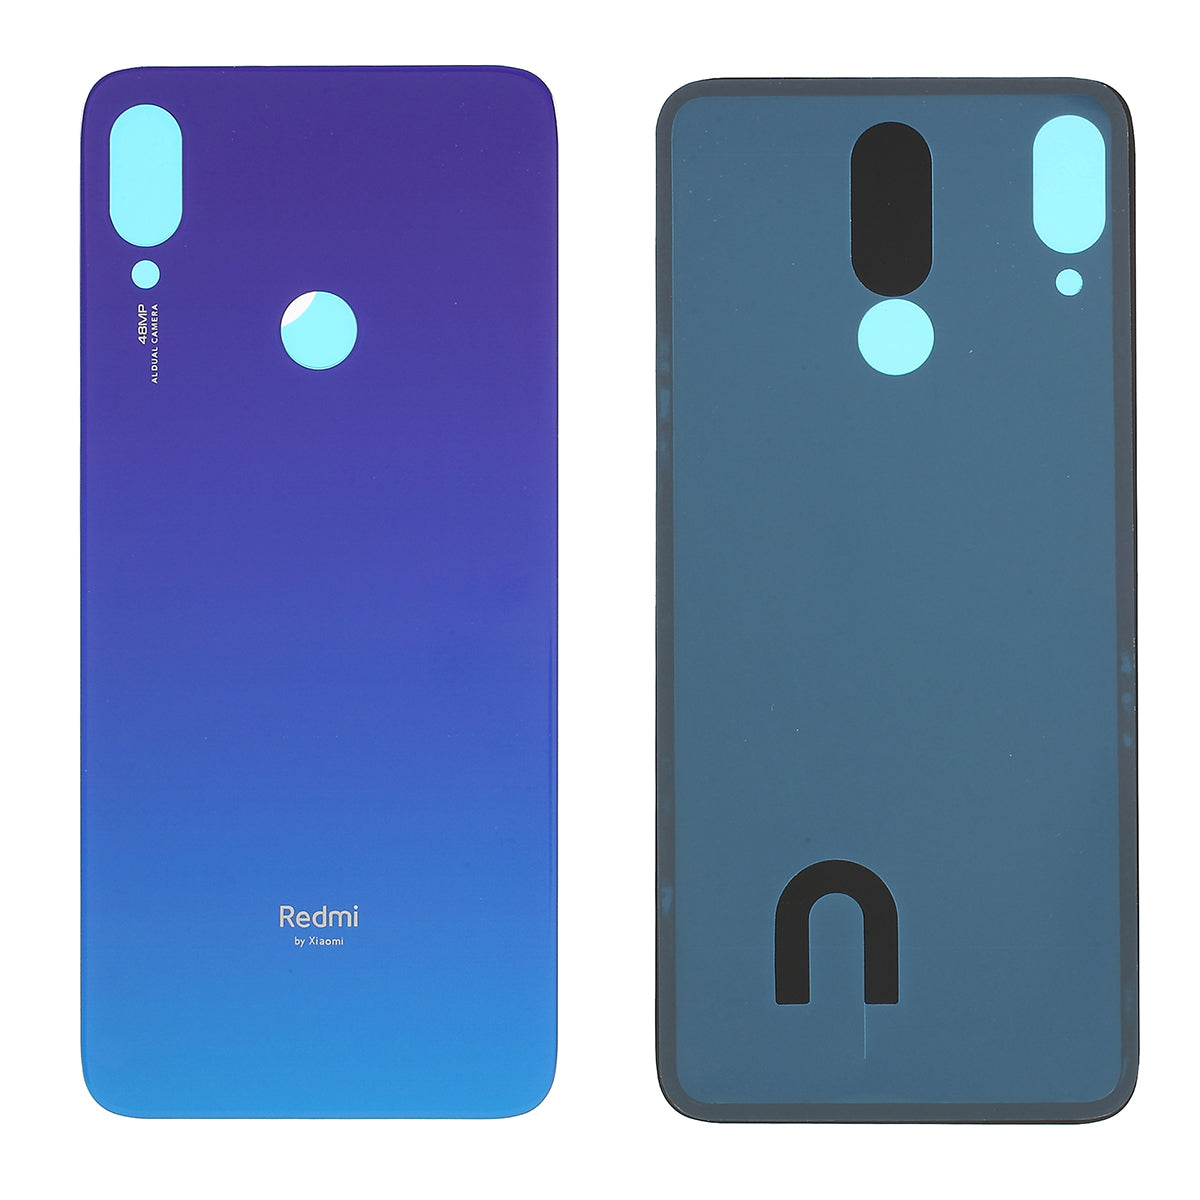 Battery Door Housing Back Cover Repair Part for Xiaomi Redmi Note 7 / Note 7 Pro - Blue